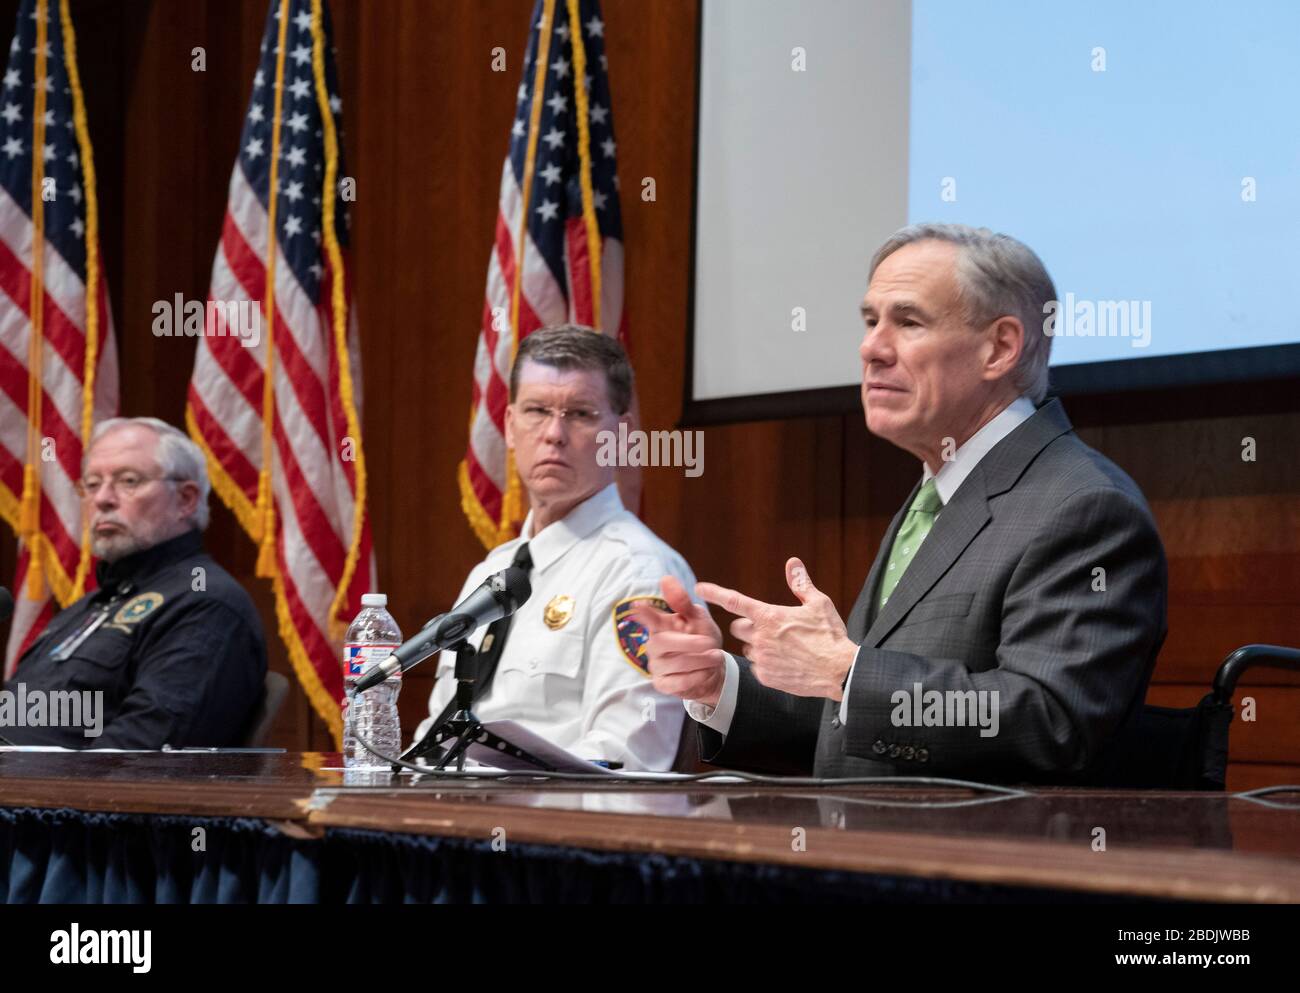 Texas Governor Greg Abbott, right, briefs the Capitol press corps on Texas companies ramping up voluntary production of face masks and face shields to meet soaring demand in combating the coronavirus epidemic. State Director of Emergency Management Nim Kidd, center, listens. Stock Photo